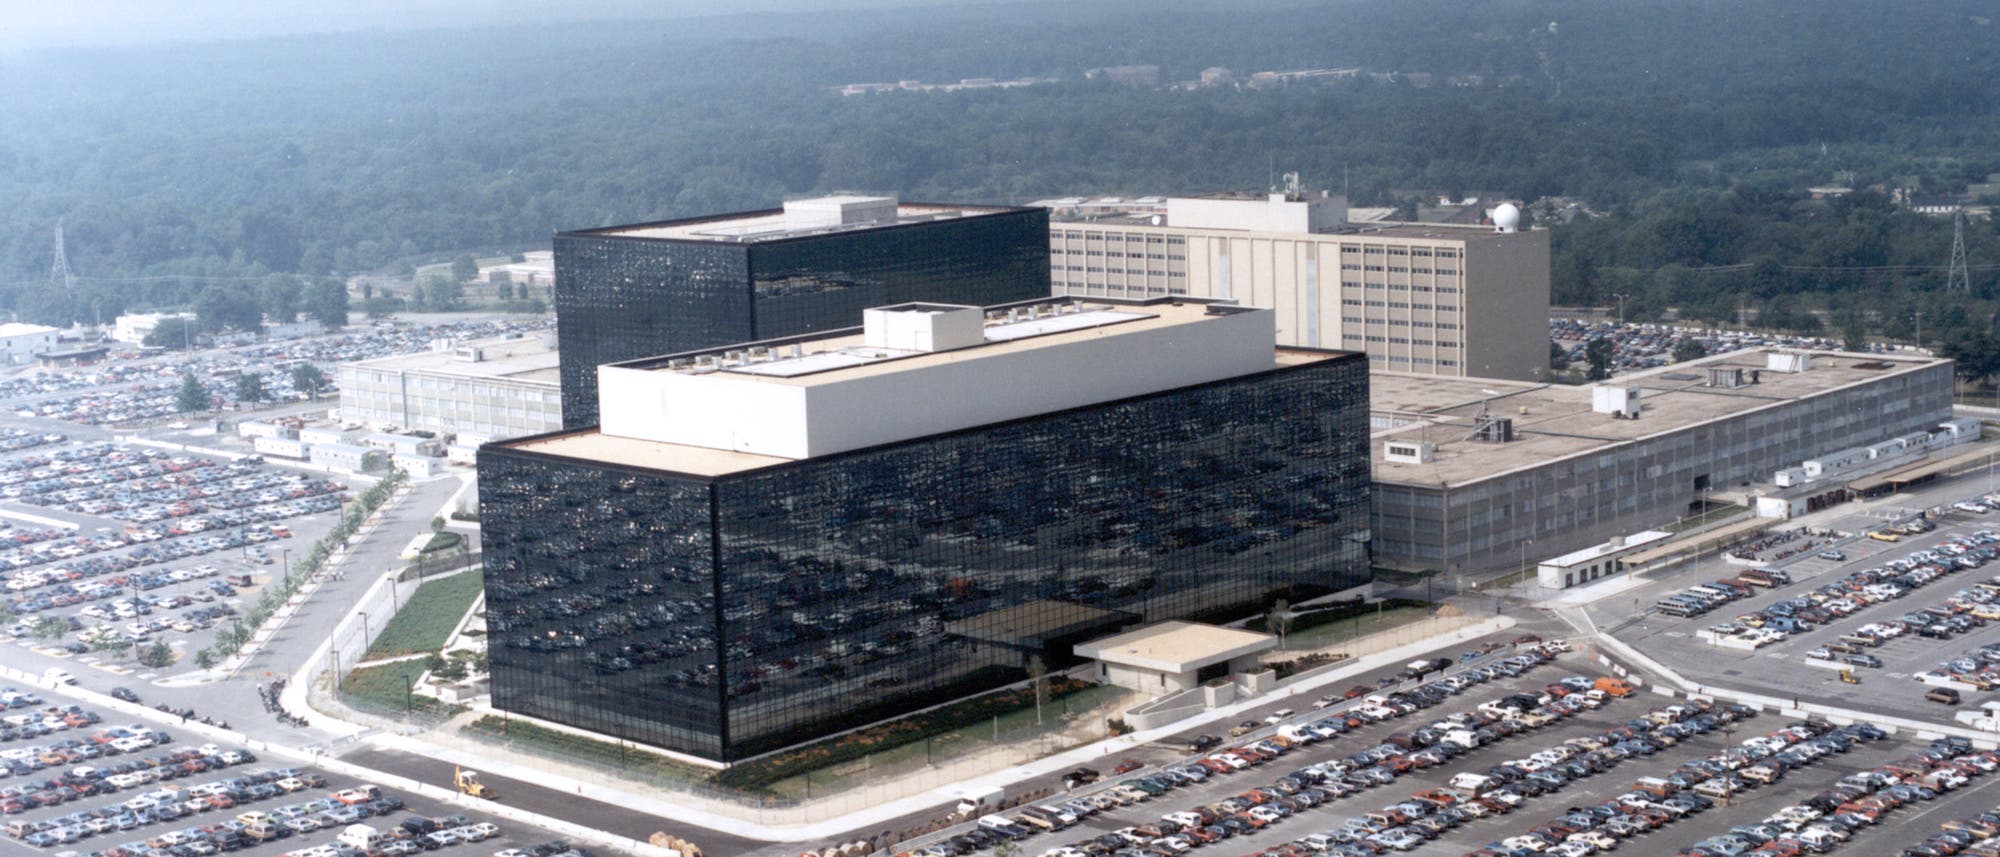 Das Hauptquartier der National Security Agency in Fort Meade (Maryland).